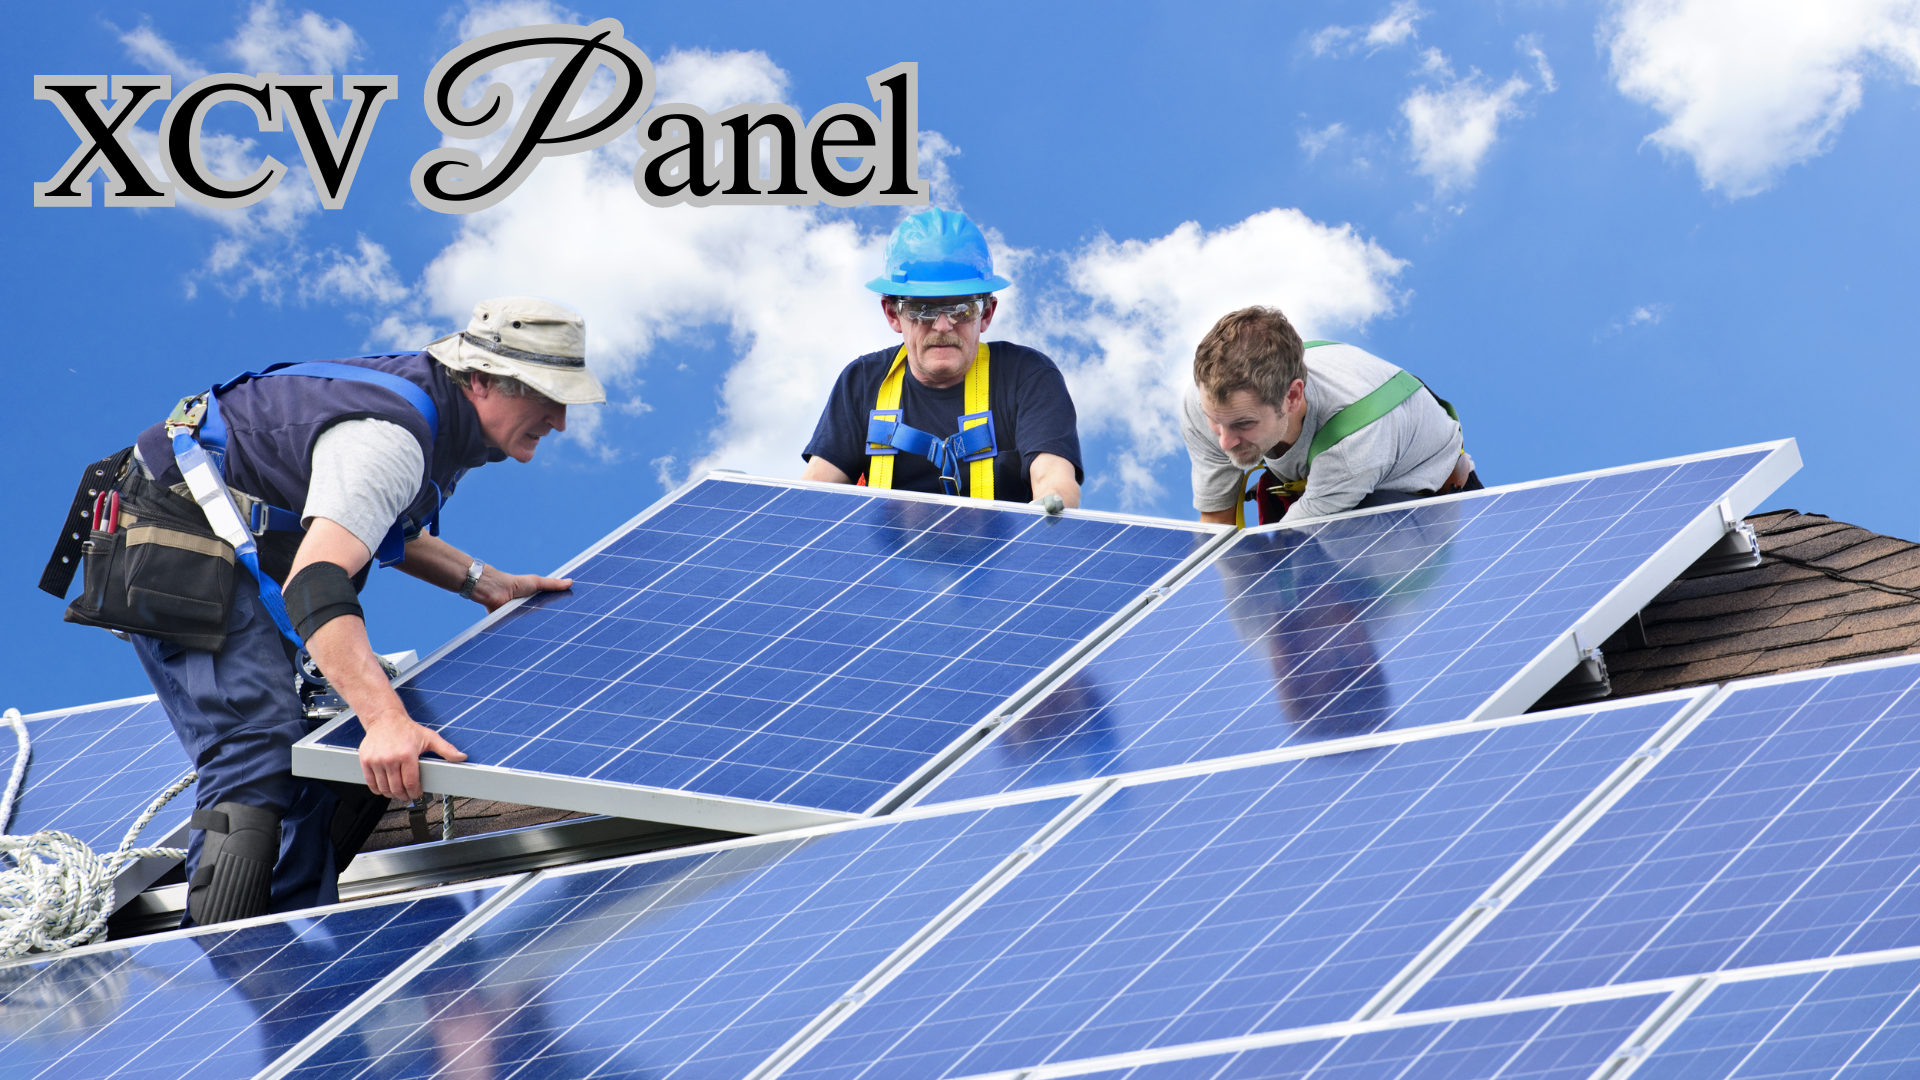 The Ultimate Guide to XCV Panel: Everything You Need to Know